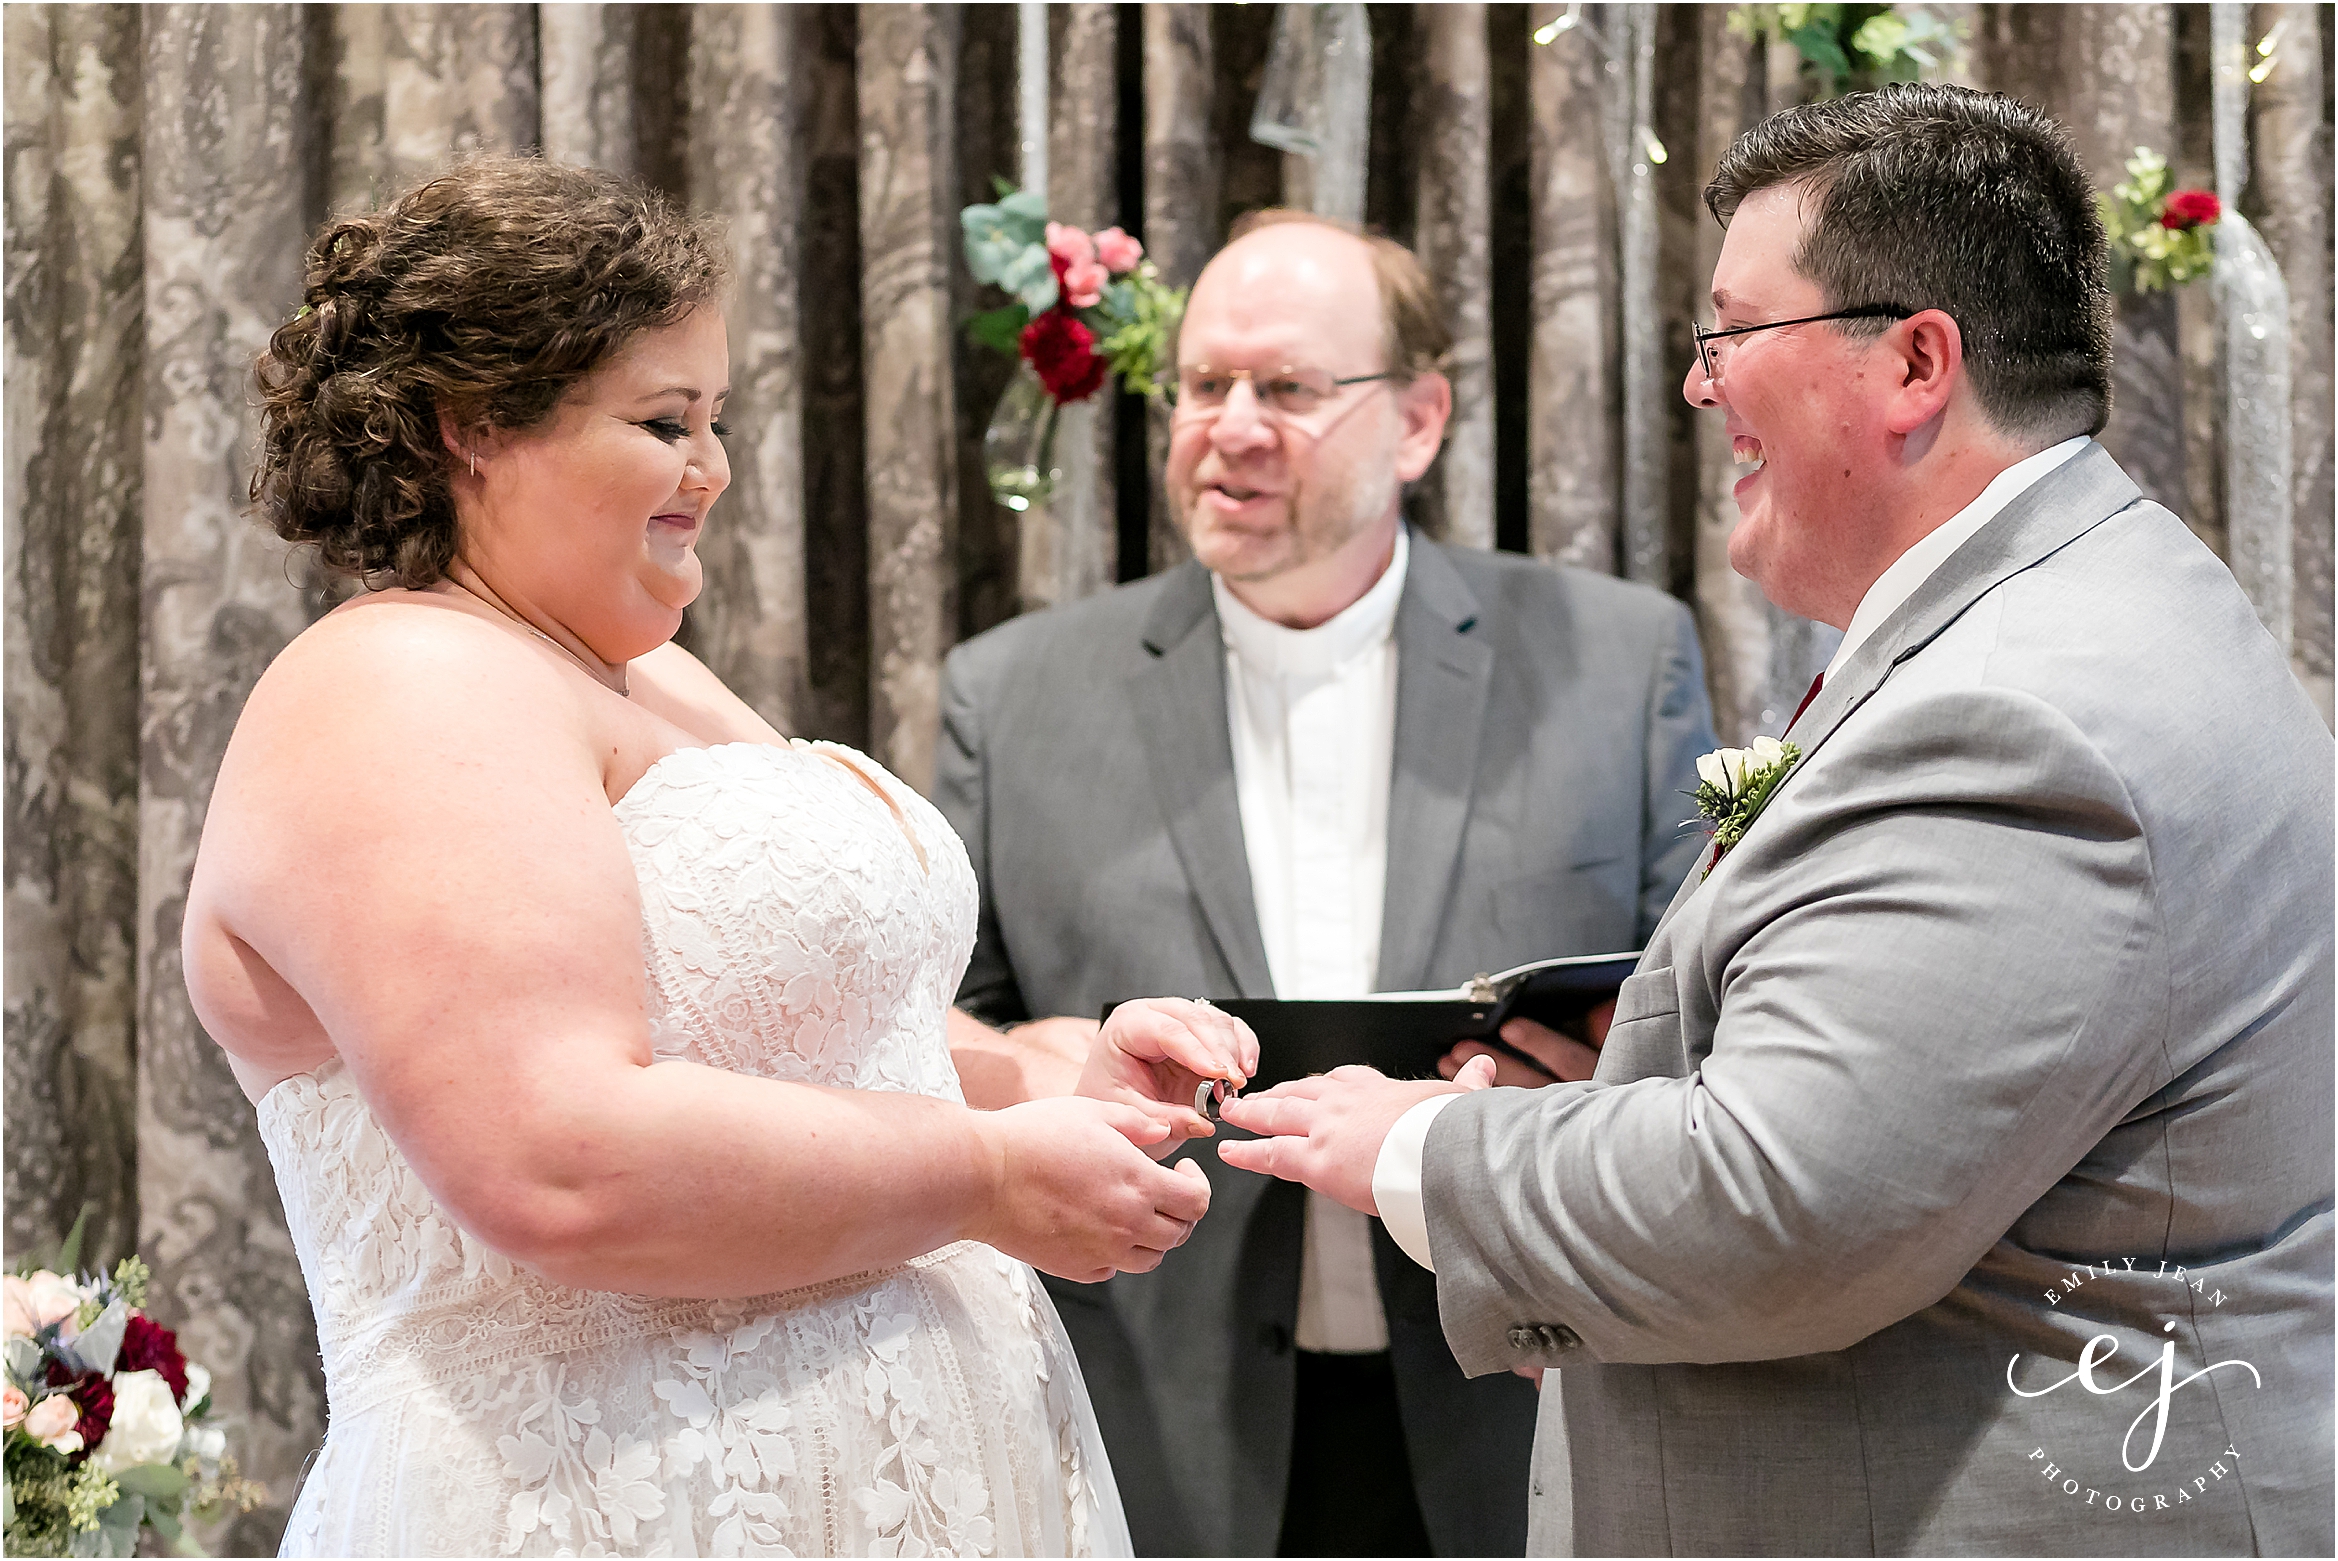 exchanging rings during wedding ceremony at the charmant